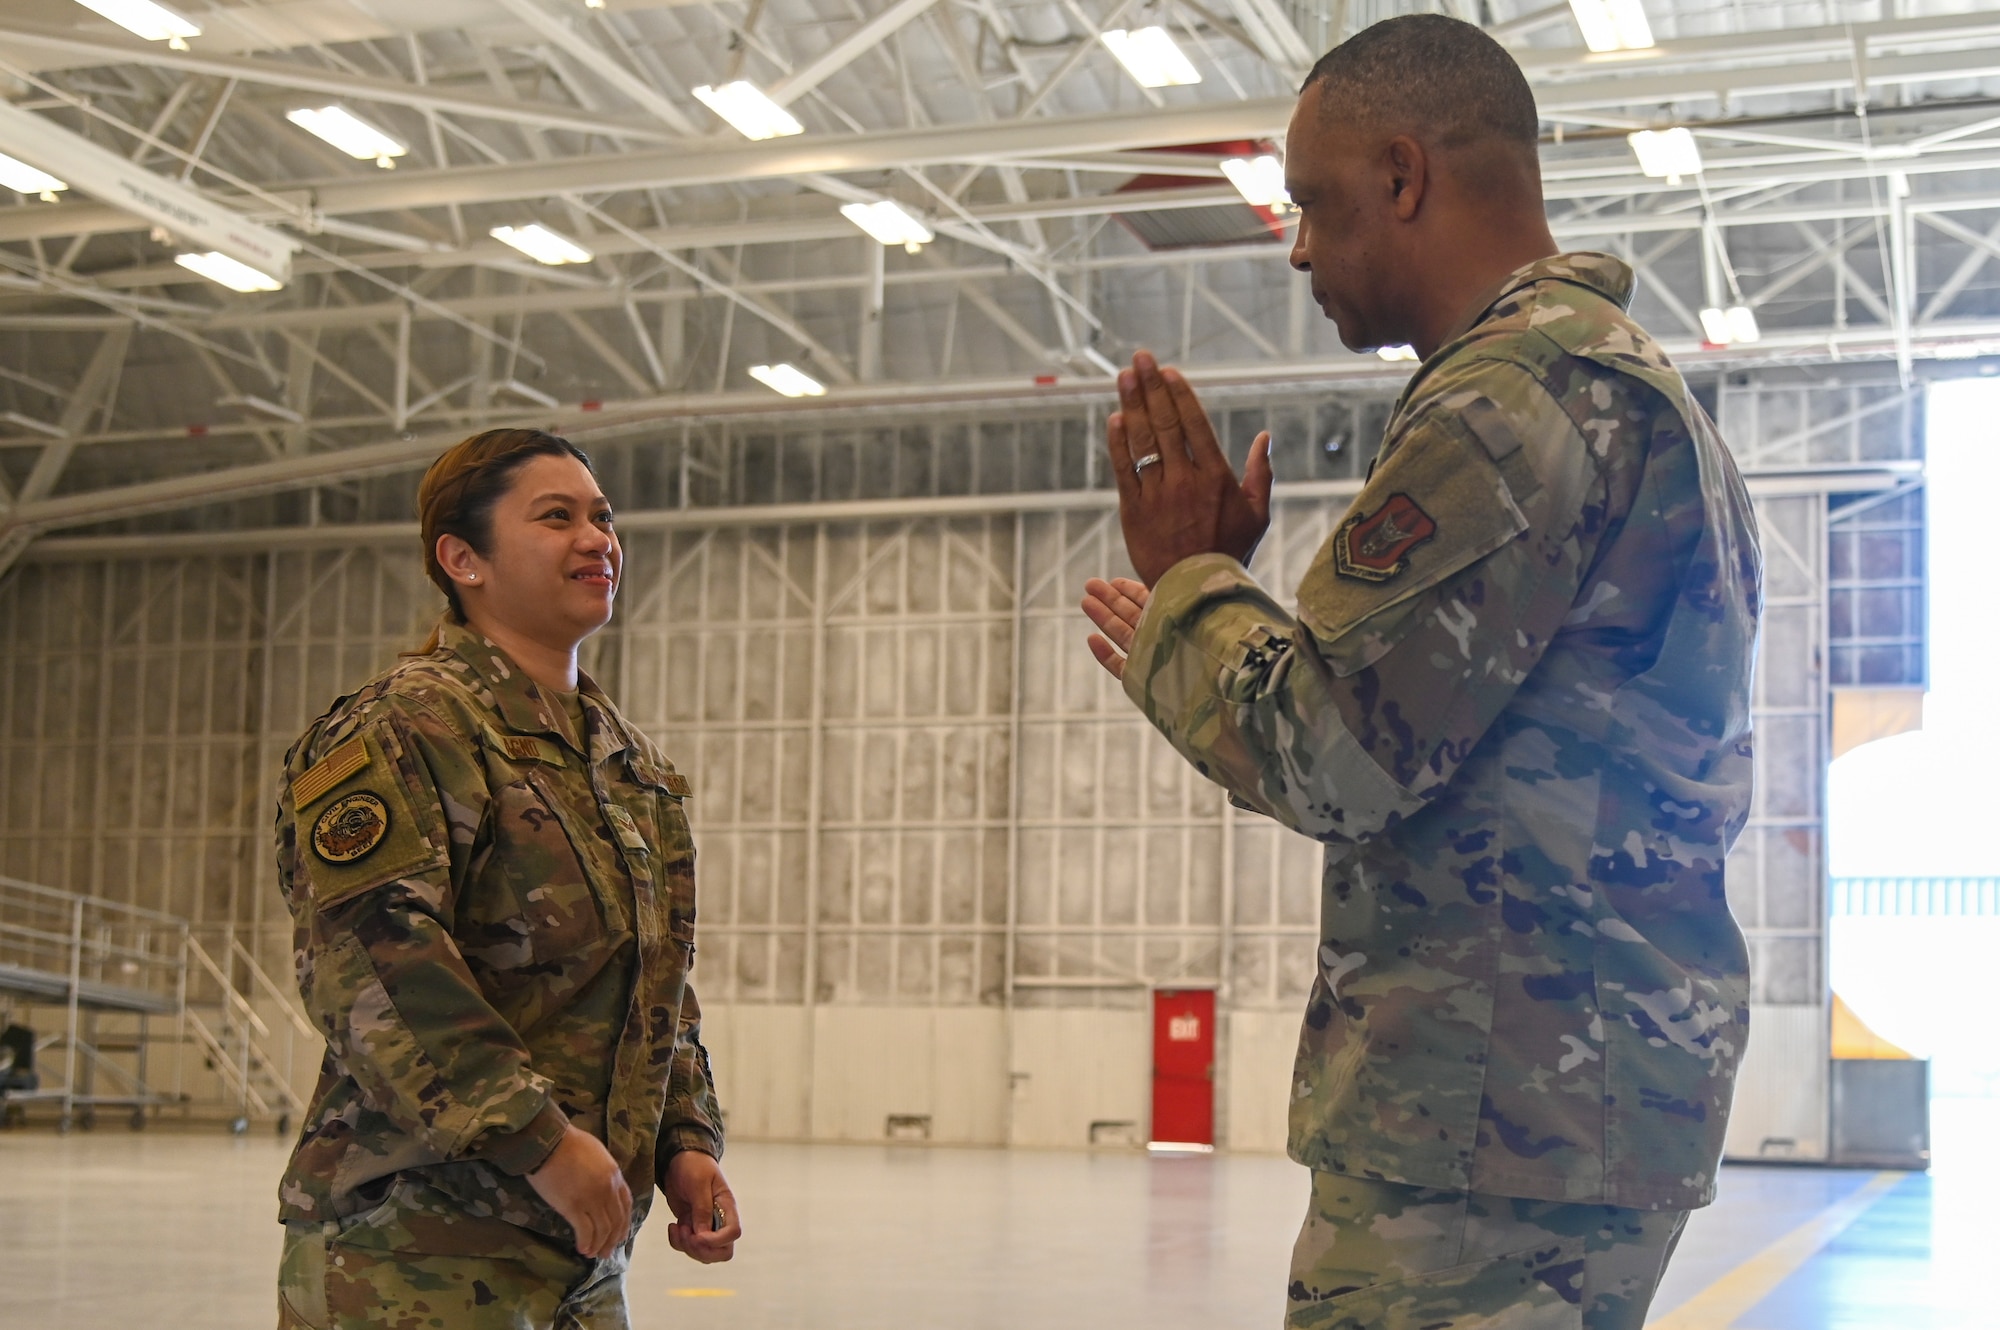 Chief Master Sgt. Timothy C. White Jr., command chief master sergeant, Air Force Reserve Command, Robins Air Force Base, Georgia, applauds Senior Airman Anna Agno from the 940th Civil Engineer Squadron, Beale AFB, during an E-4 and Below meeting June 13, 2021, at Beale AFB, California.